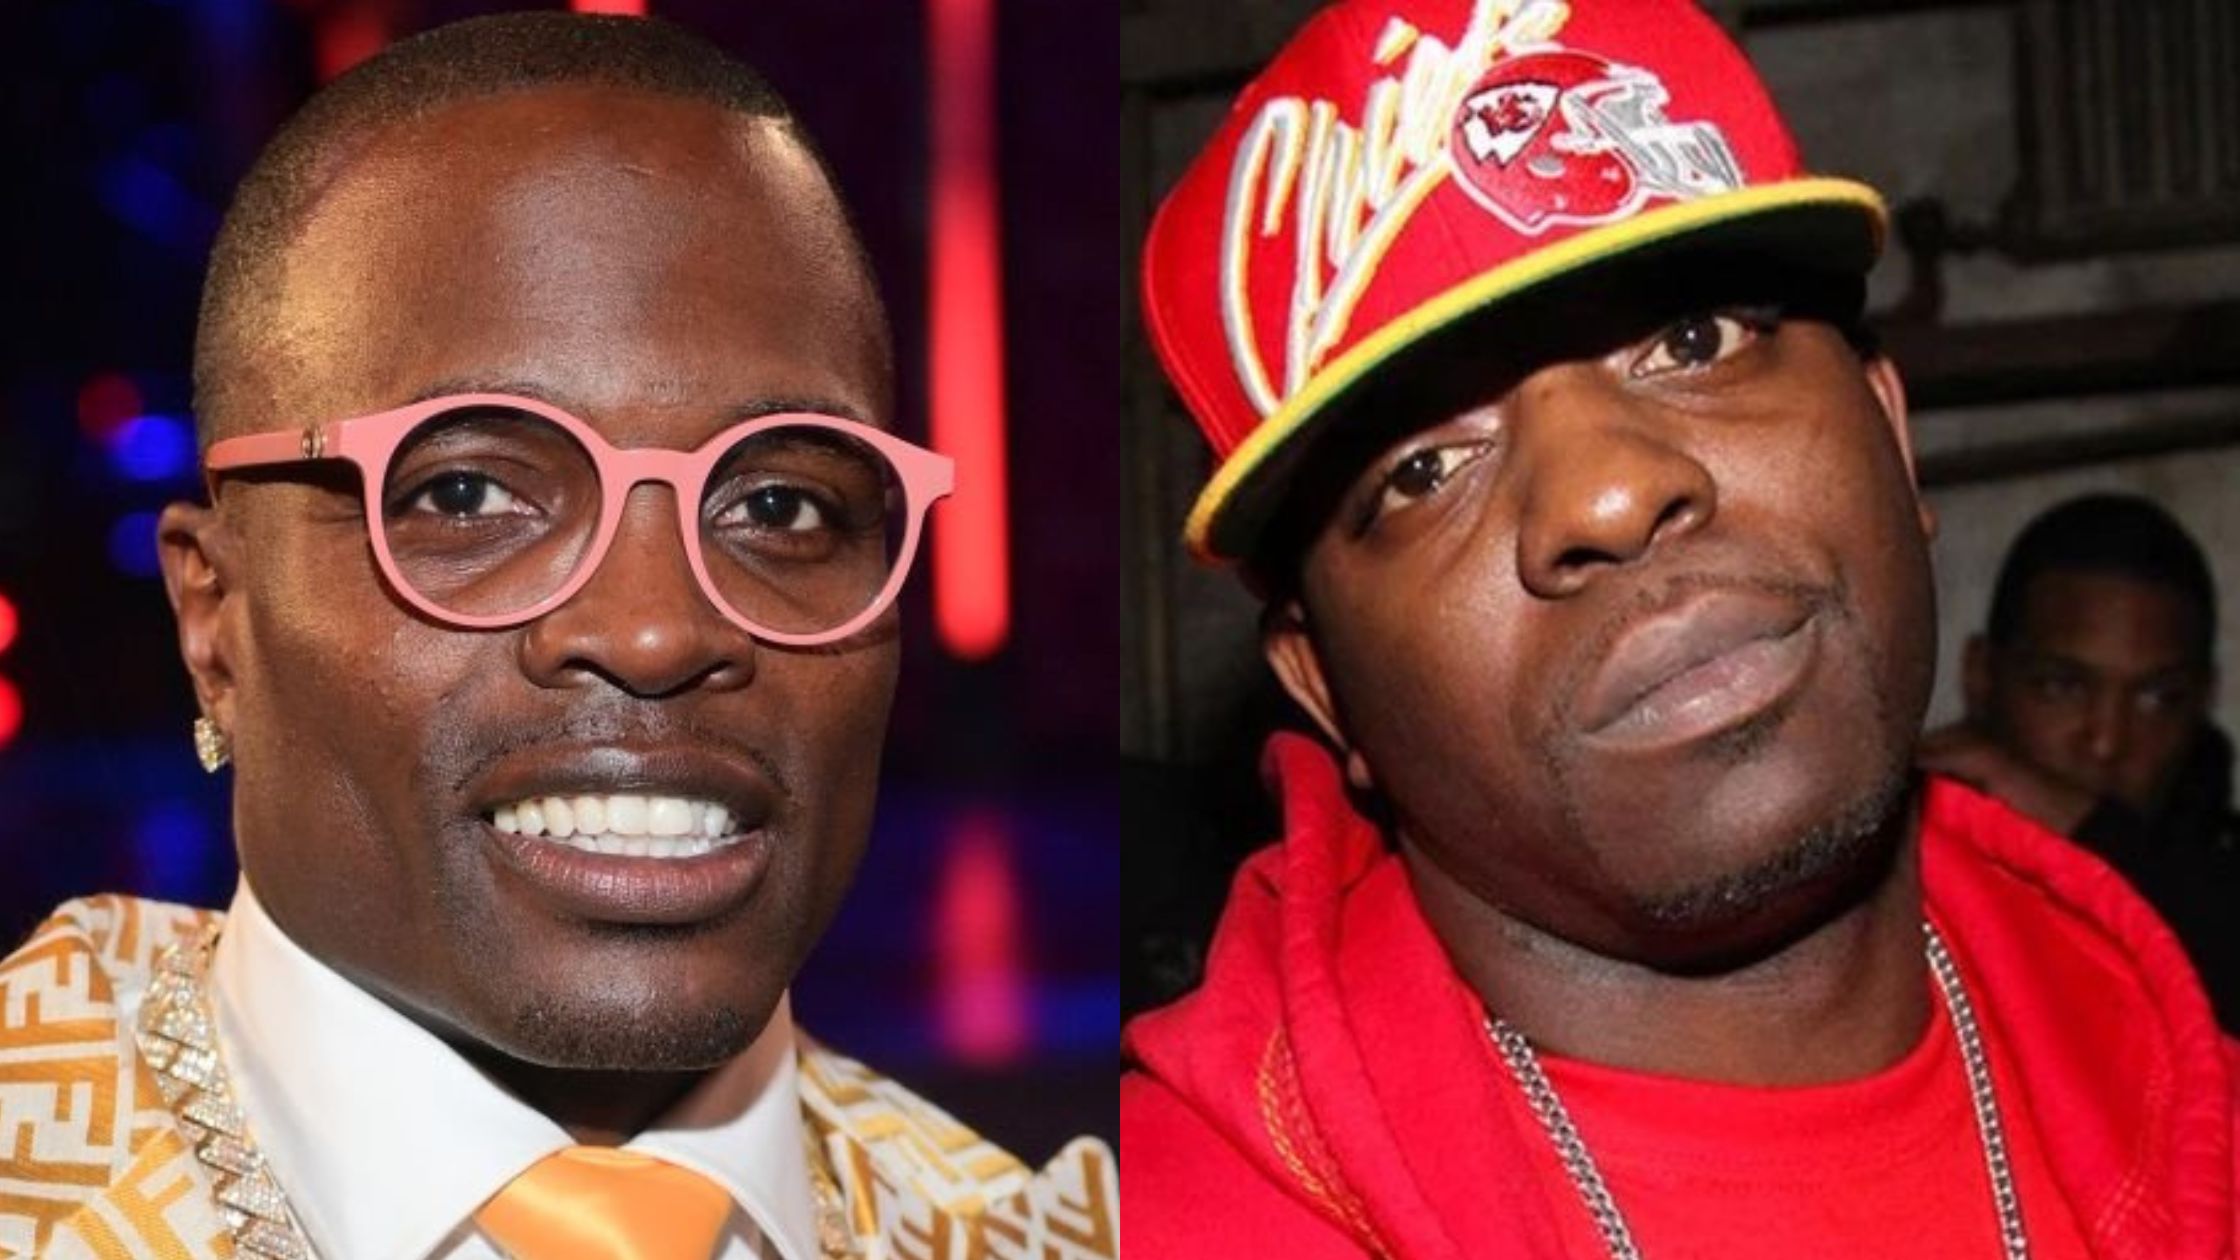 Bishop Lamor Whitehead Challenges Uncle Murda To A Boxing Match For Dissing Him On Rap Up 2022